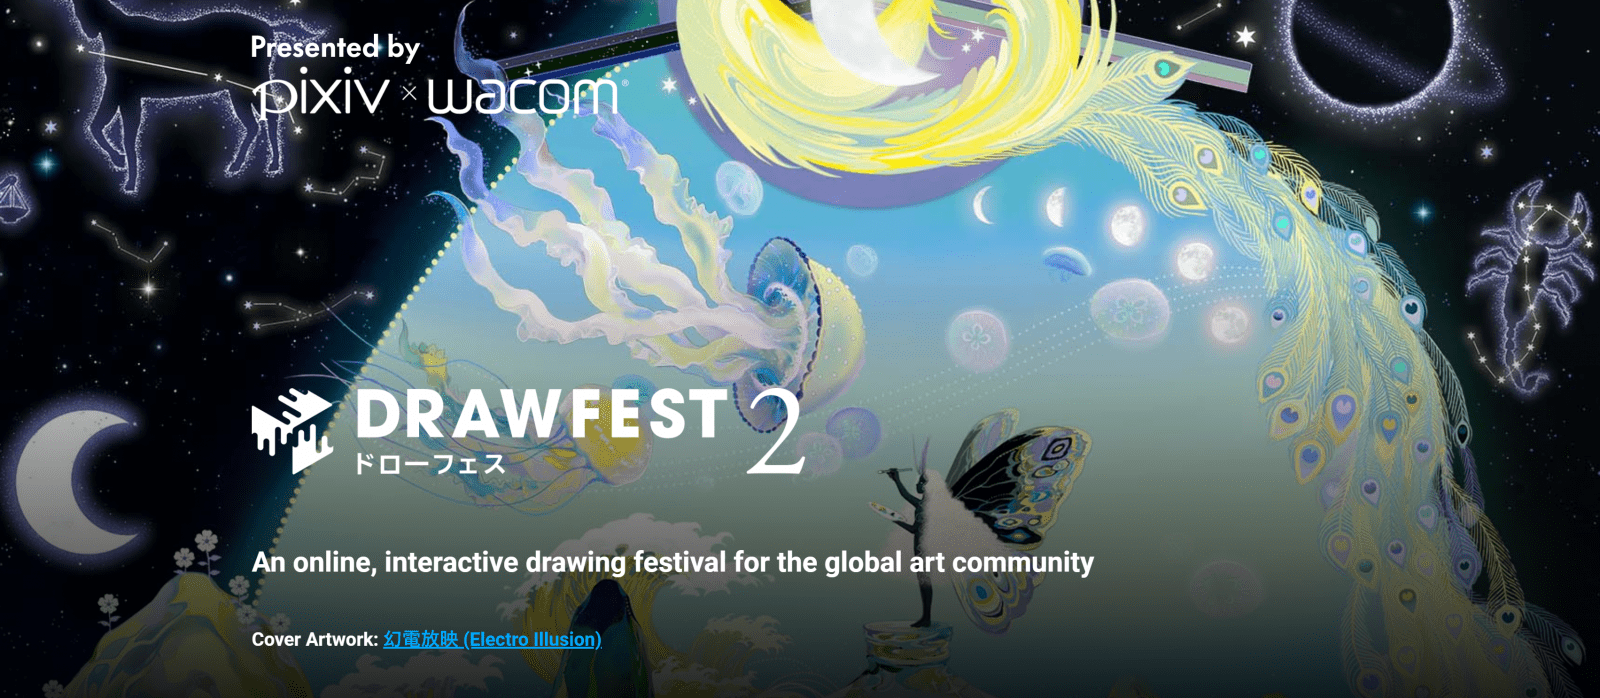 Drawfest is back by popular demand, December 18 – 19